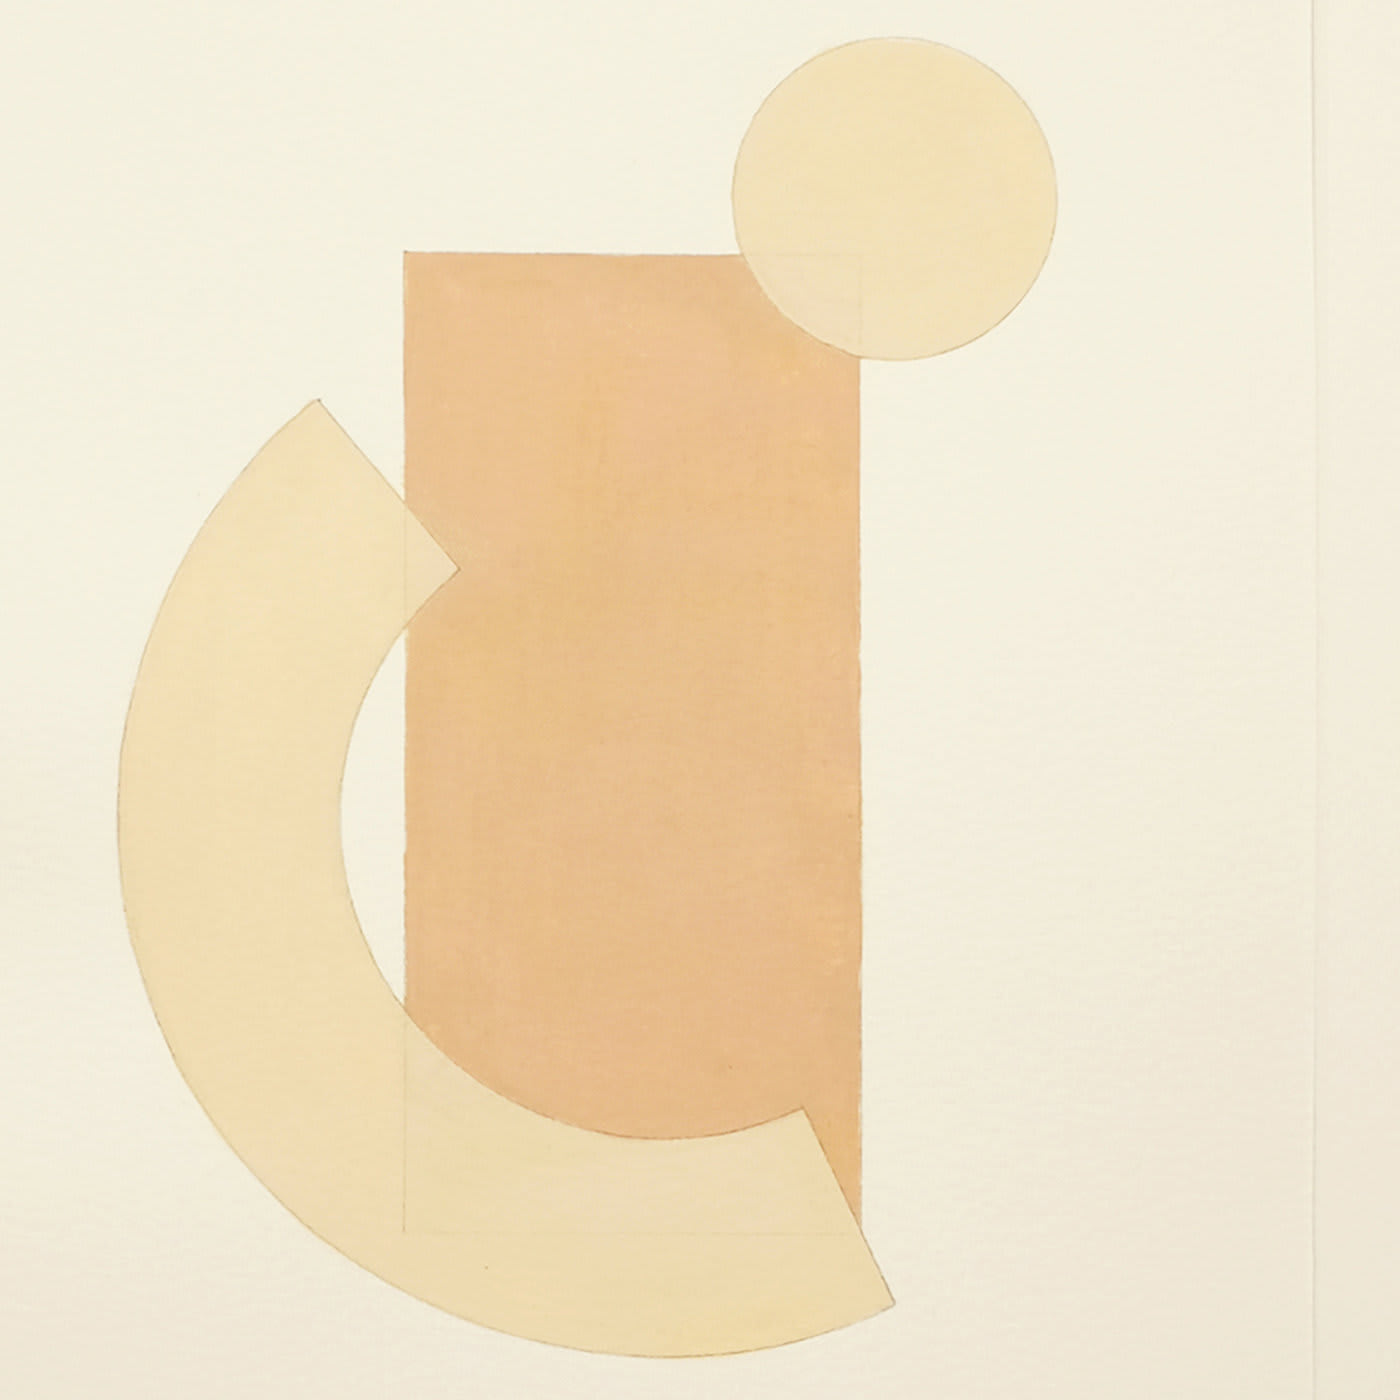 Geometric Composition Gouache and Graphite on Paper #4 - Marta Benet